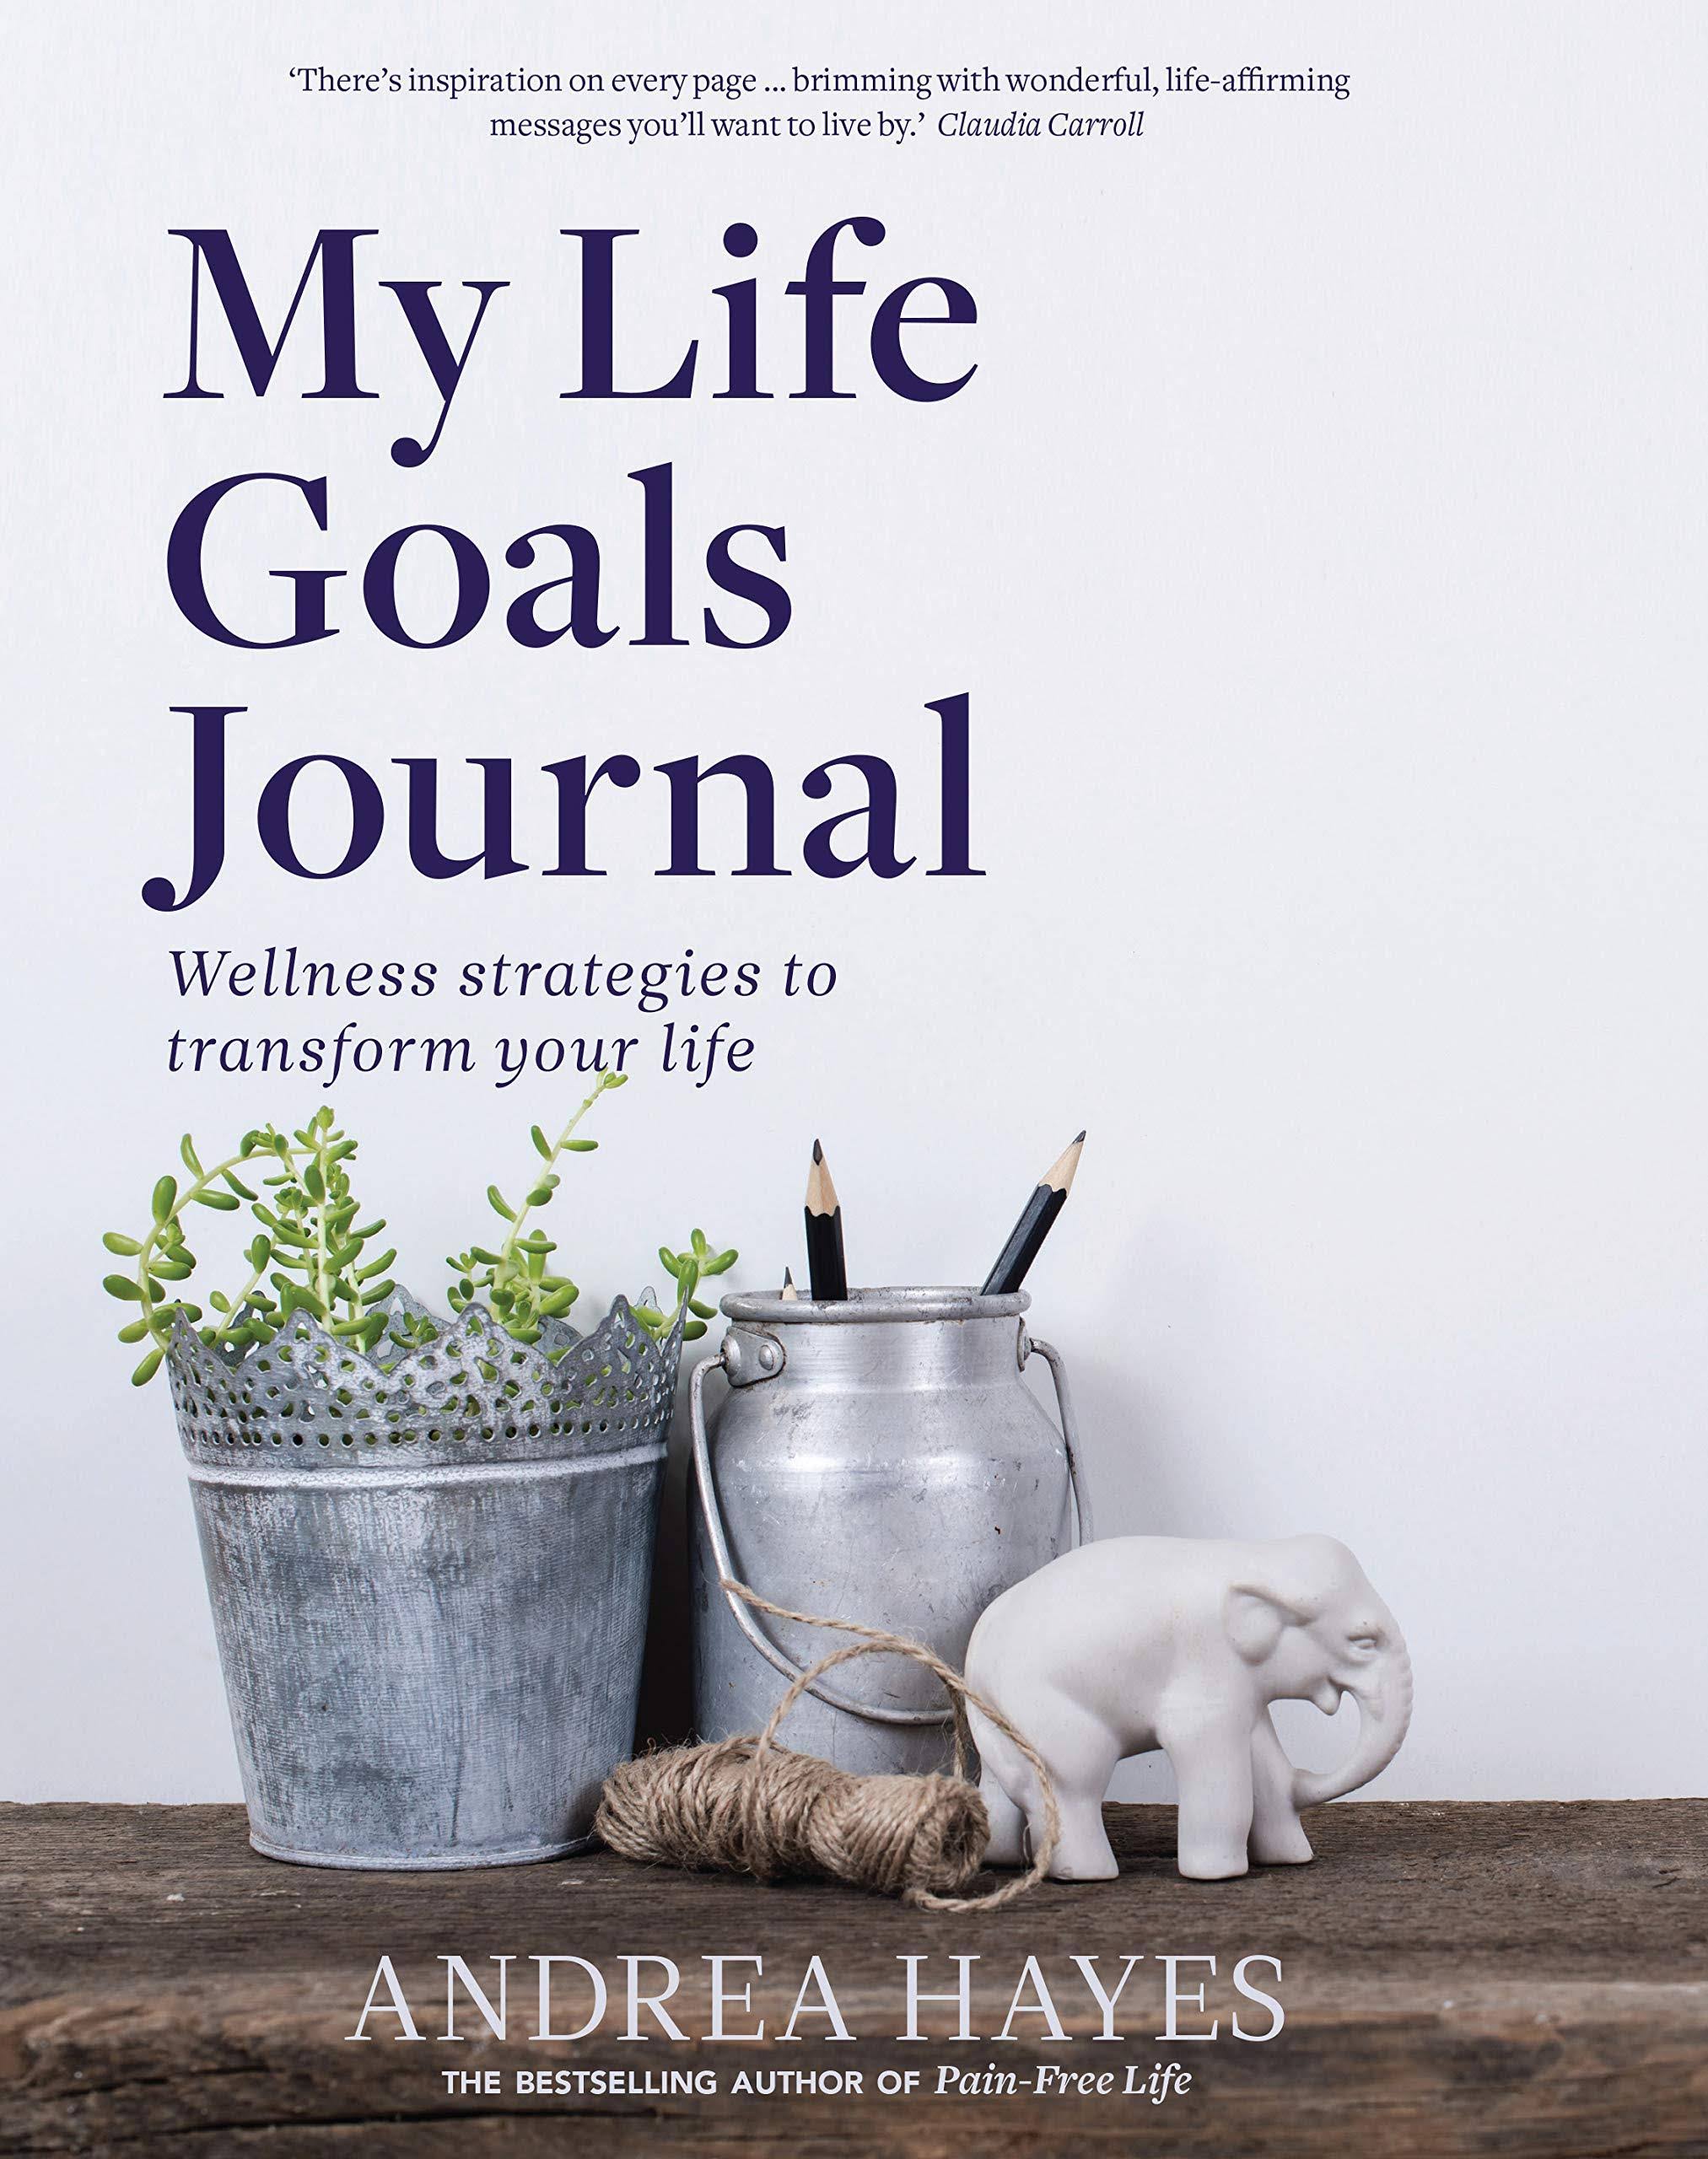 My Life Goals Journal: Wellness Strategies to Transform Your Life [Book]